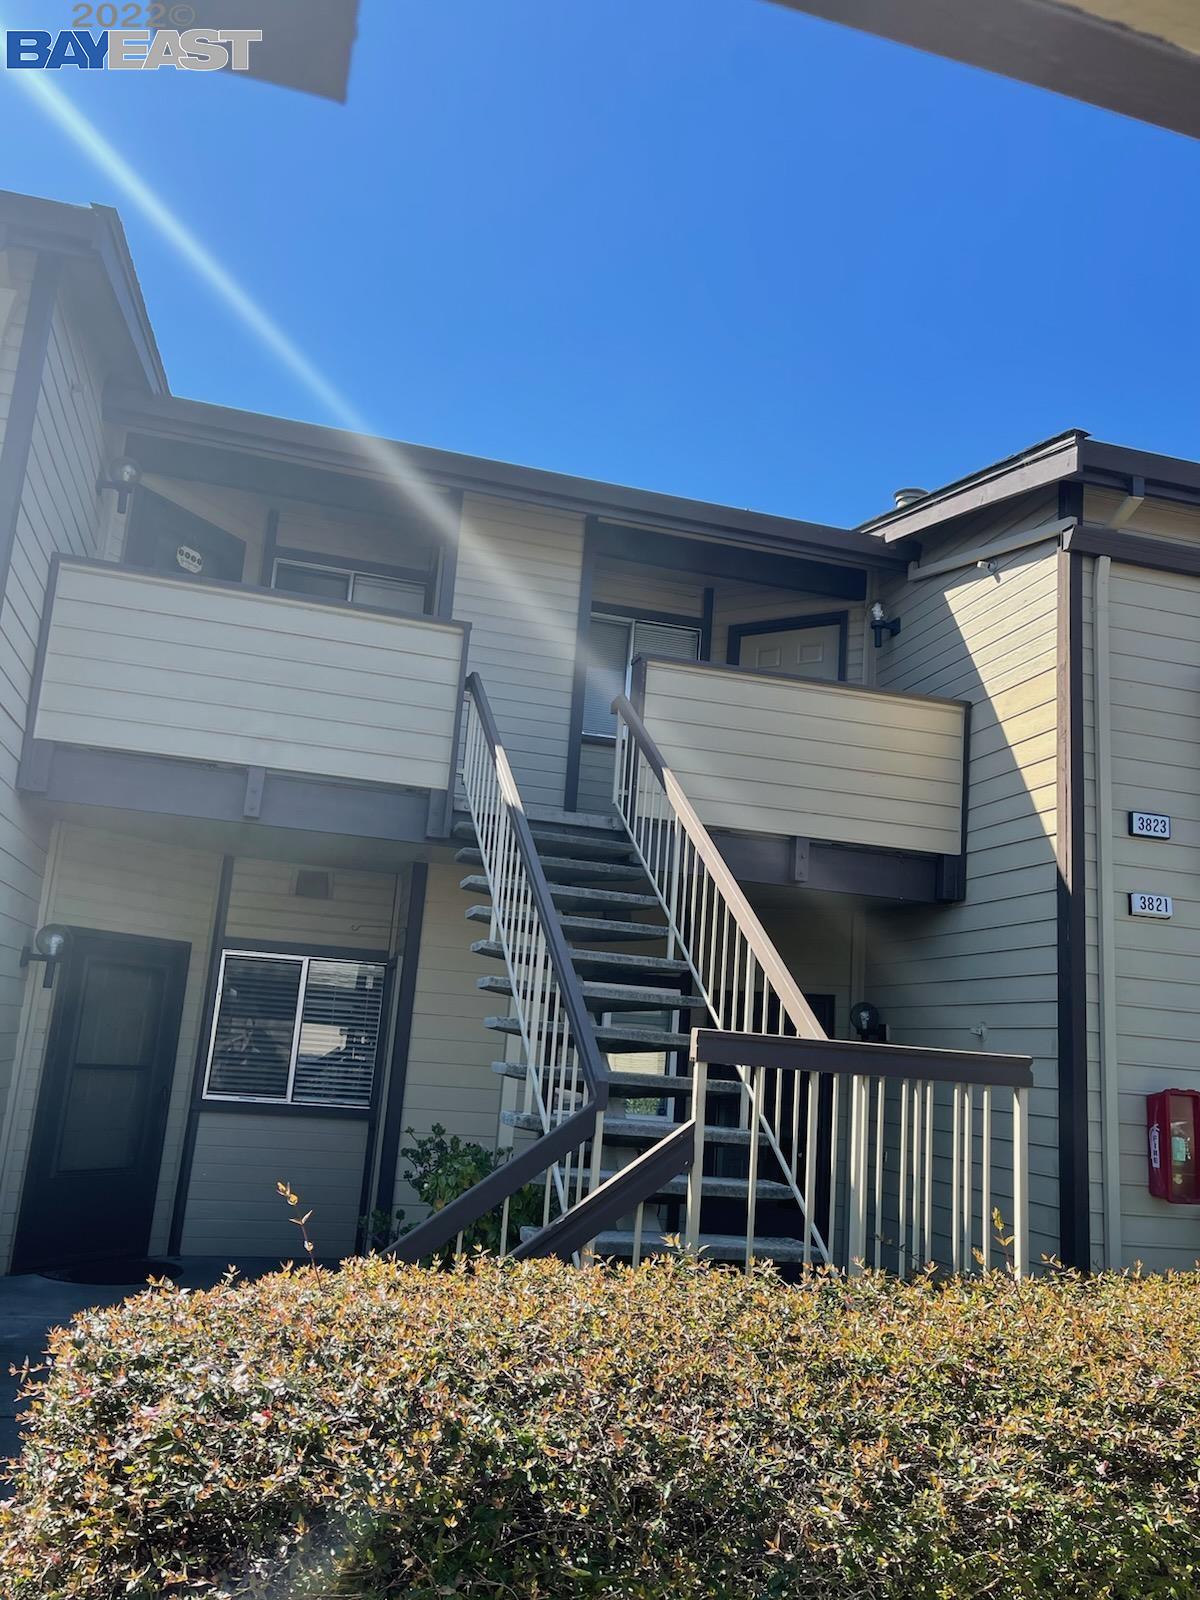 Photo of 3823 Yorkshire St in San Leandro, CA